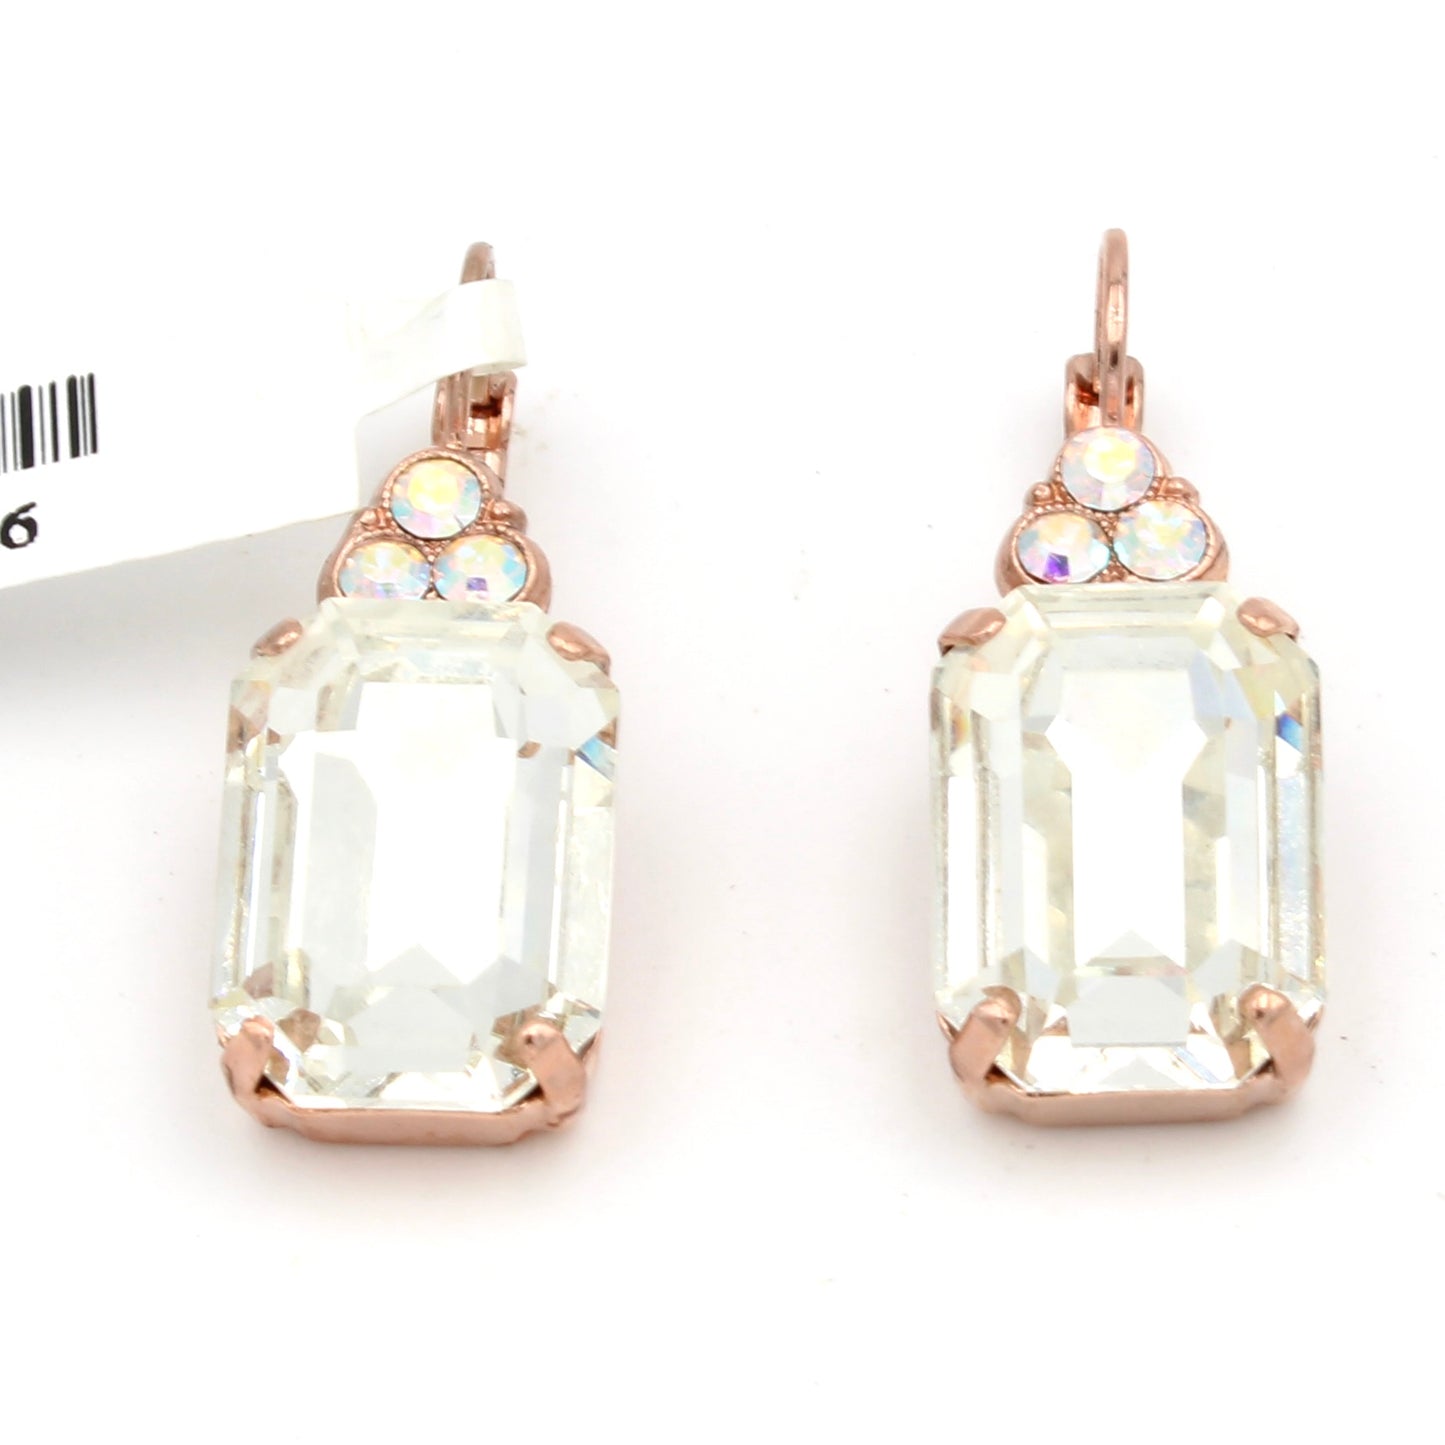 Winds of Change Collection Emerald Cut Earrings in Rose Gold